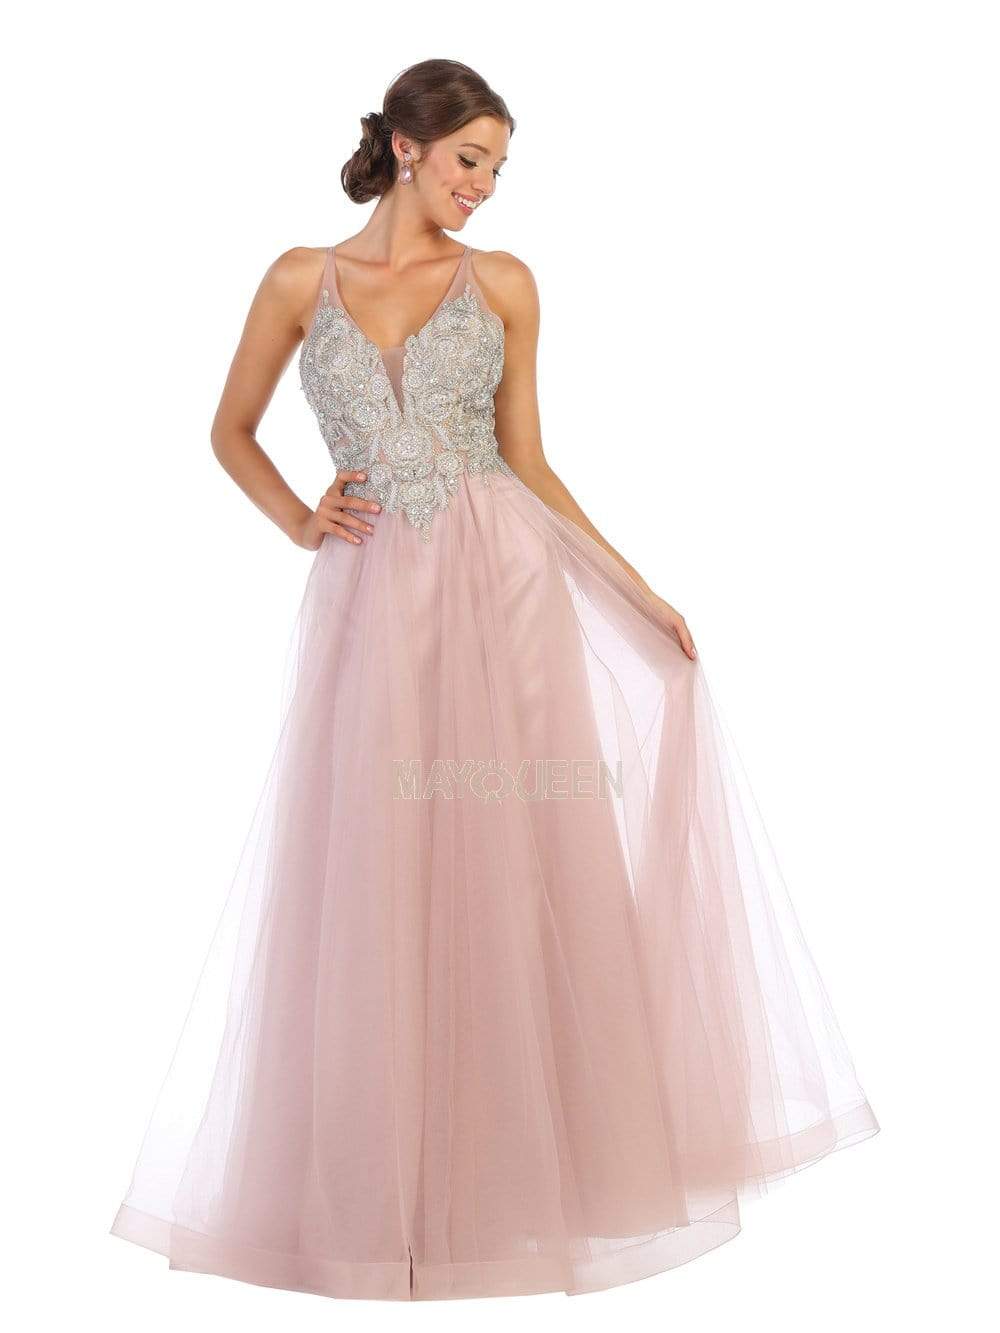 May Queen - MQ1737 Long Beaded V-Neck Bodice Tulle Dress Prom Dresses 4 / Mauve